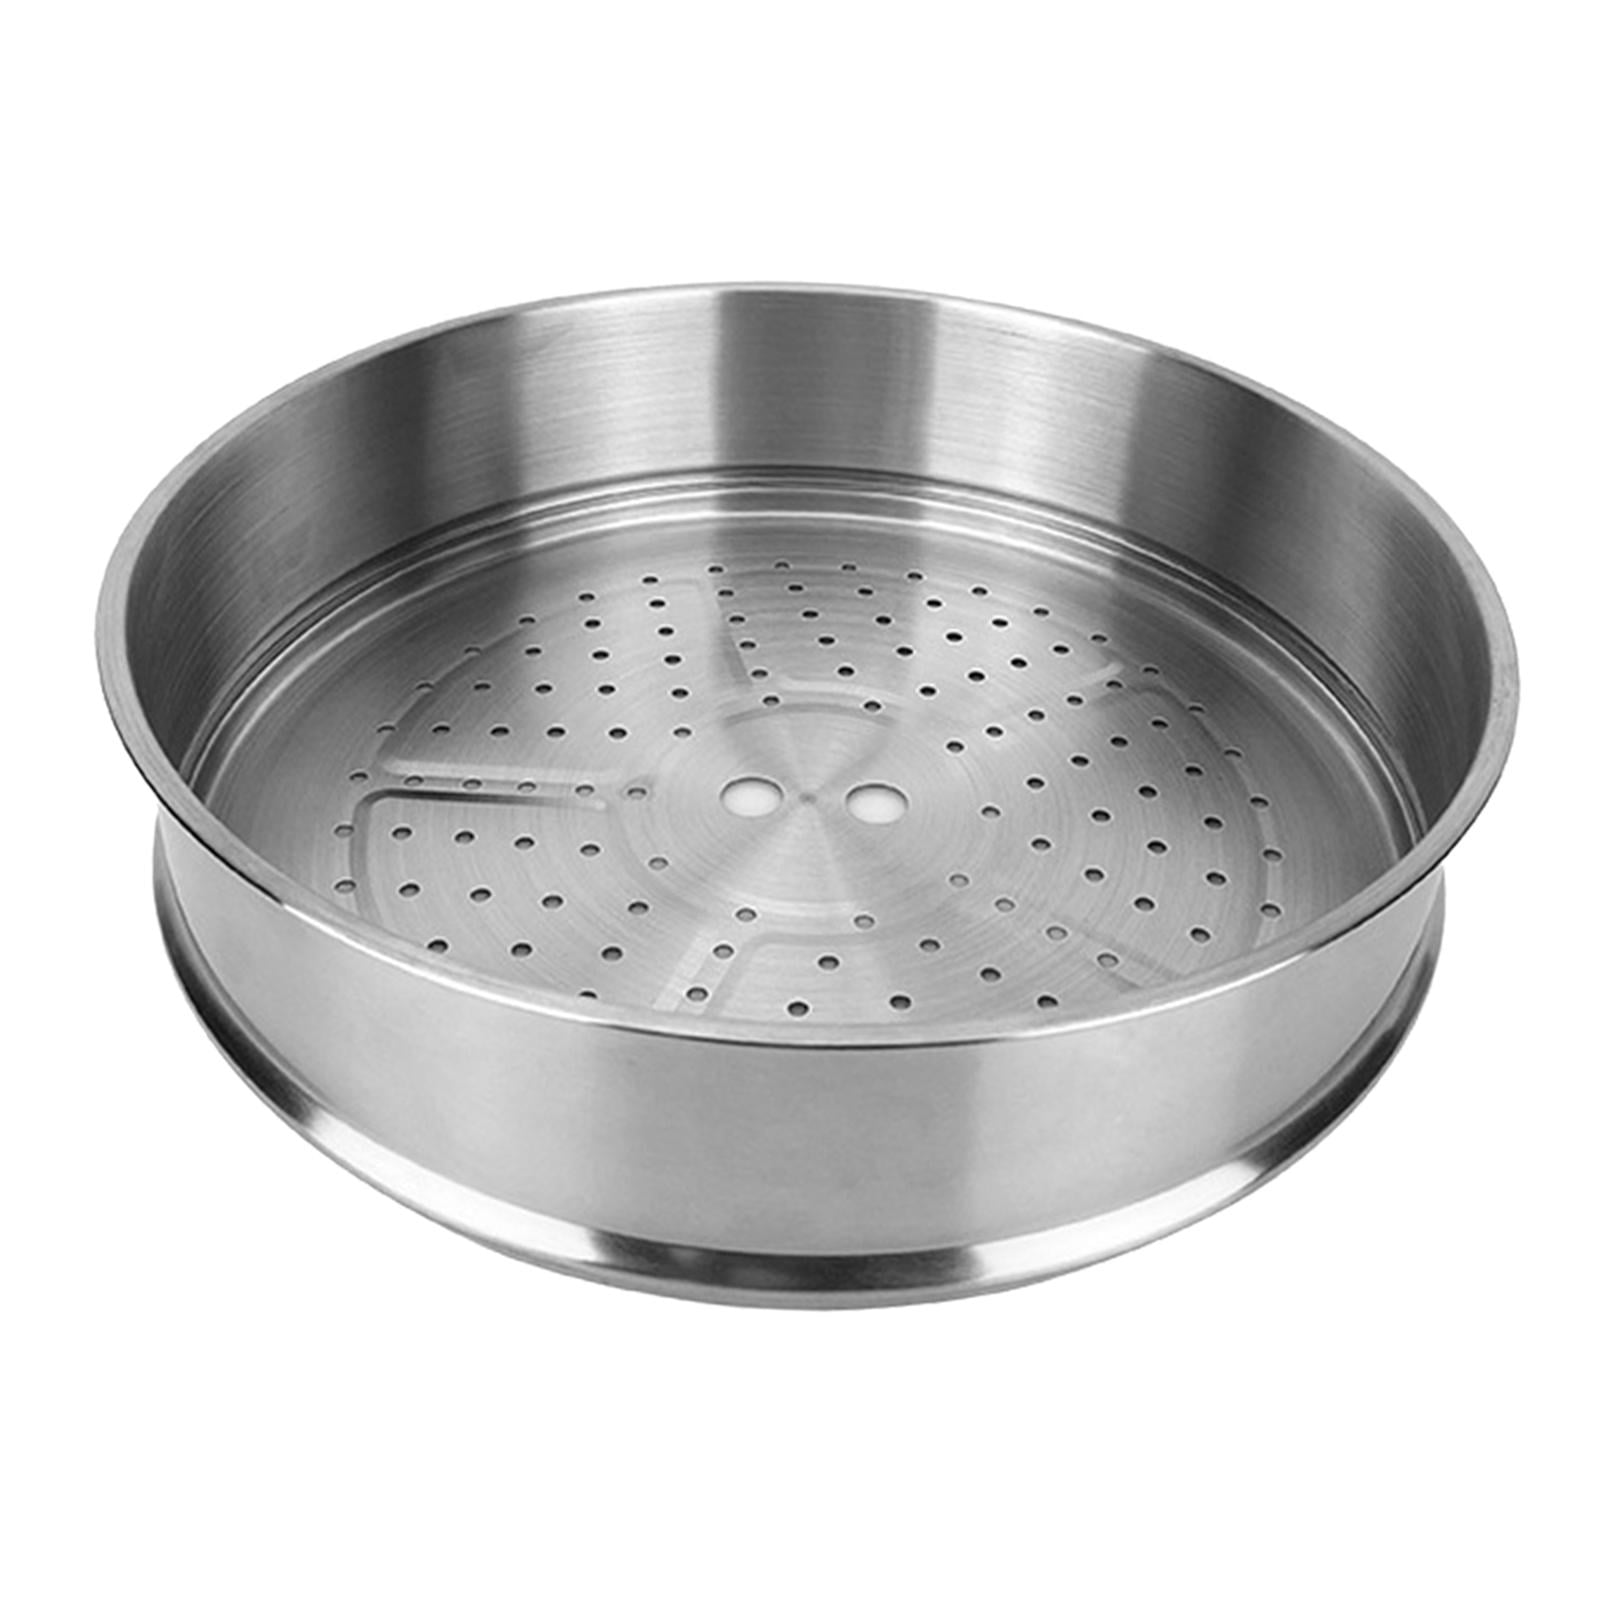 Stainless Steel Steamer Basket With Small Holes For Draining, Footed Steaming  Basket For Steaming Buns, Dumplings, Vegetables And More